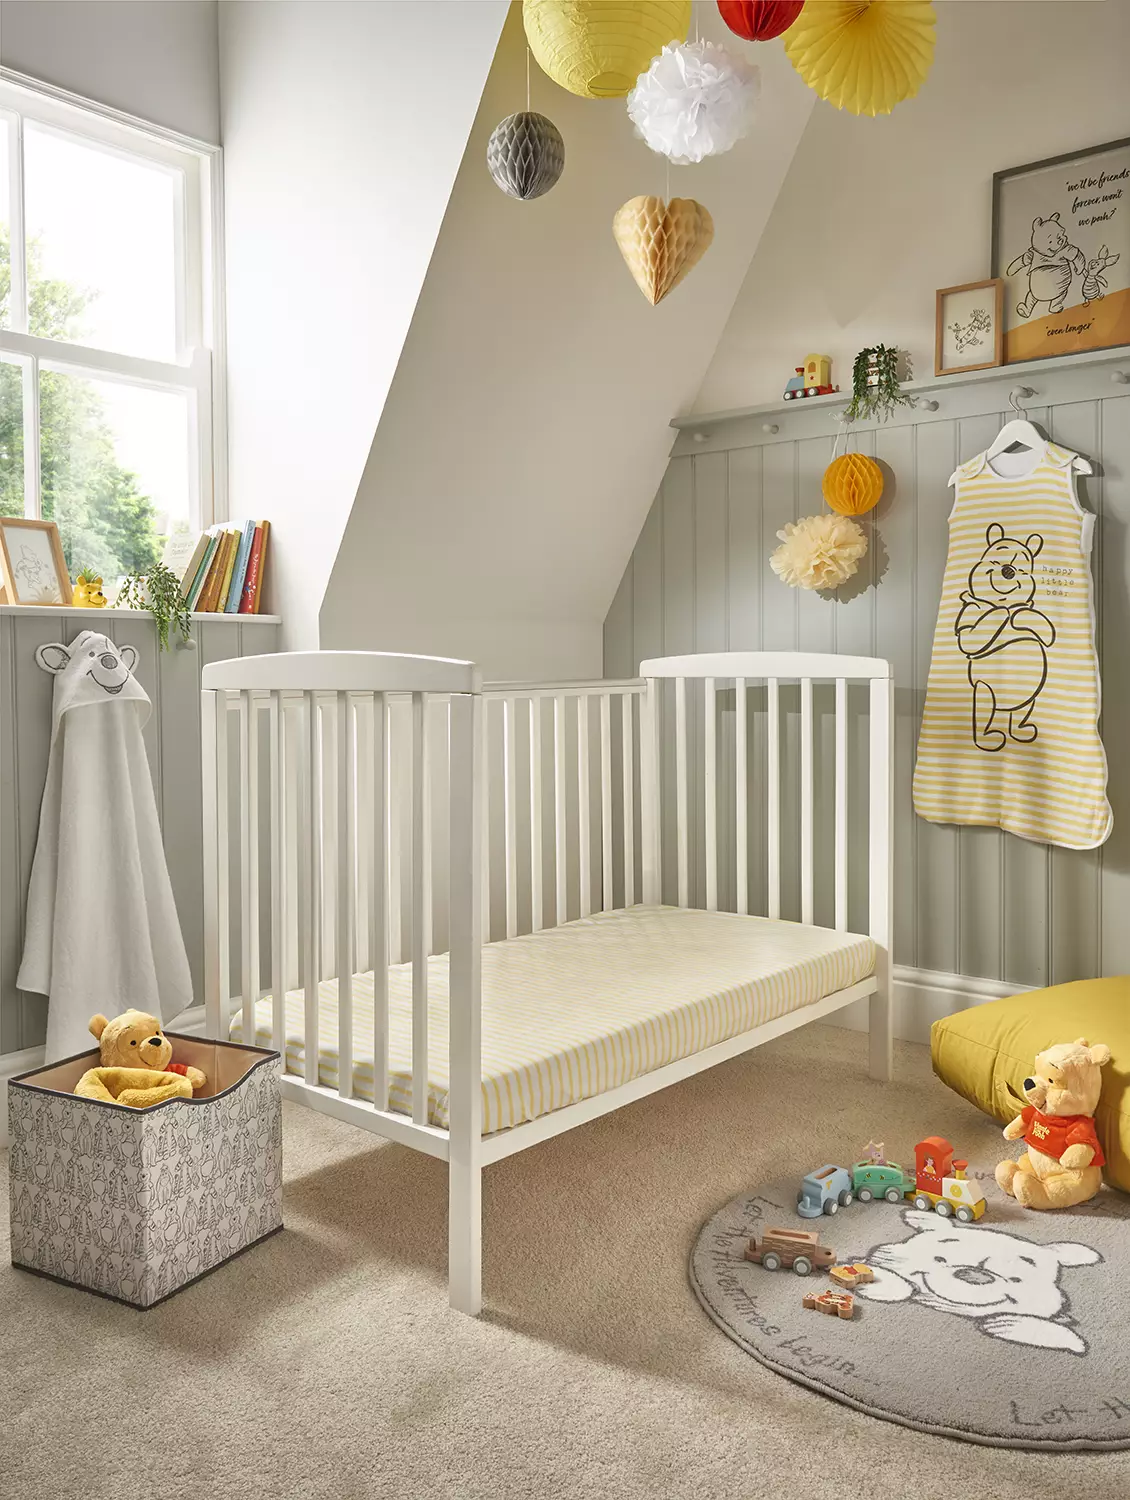 From bed-spreads and rugs, to storage boxes and bath towels, the new nursery range features iconic Disney characters (